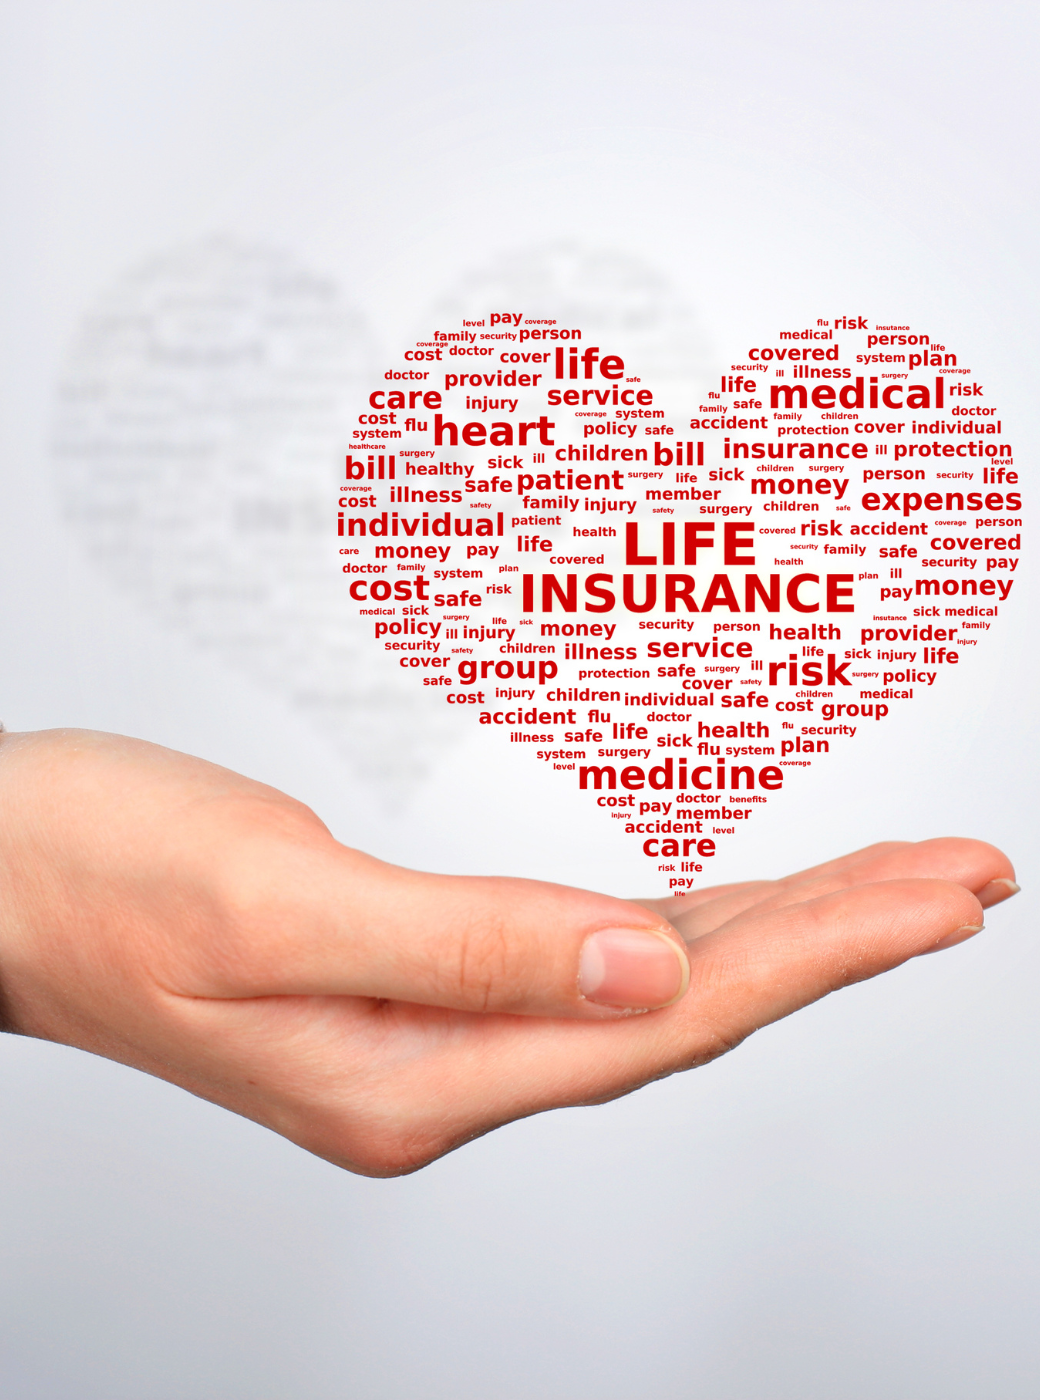 Why Don’t More Americans Have Life Insurance? 